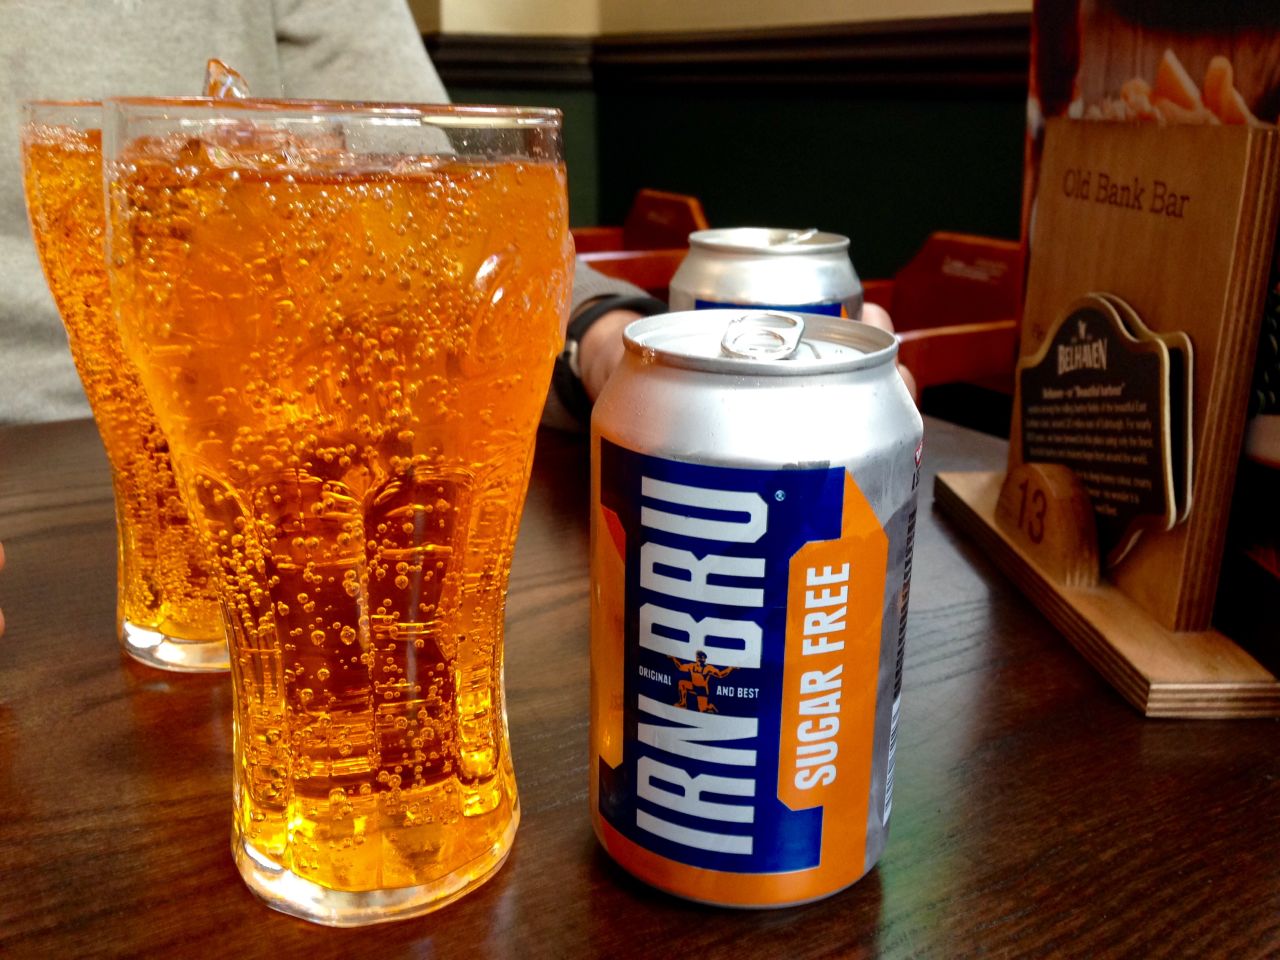 <strong>Irn Bru and Lorne Sausage in Edinburgh:</strong> Scotland's "national drink" is the preferred pairing with the greasy sausage roll.